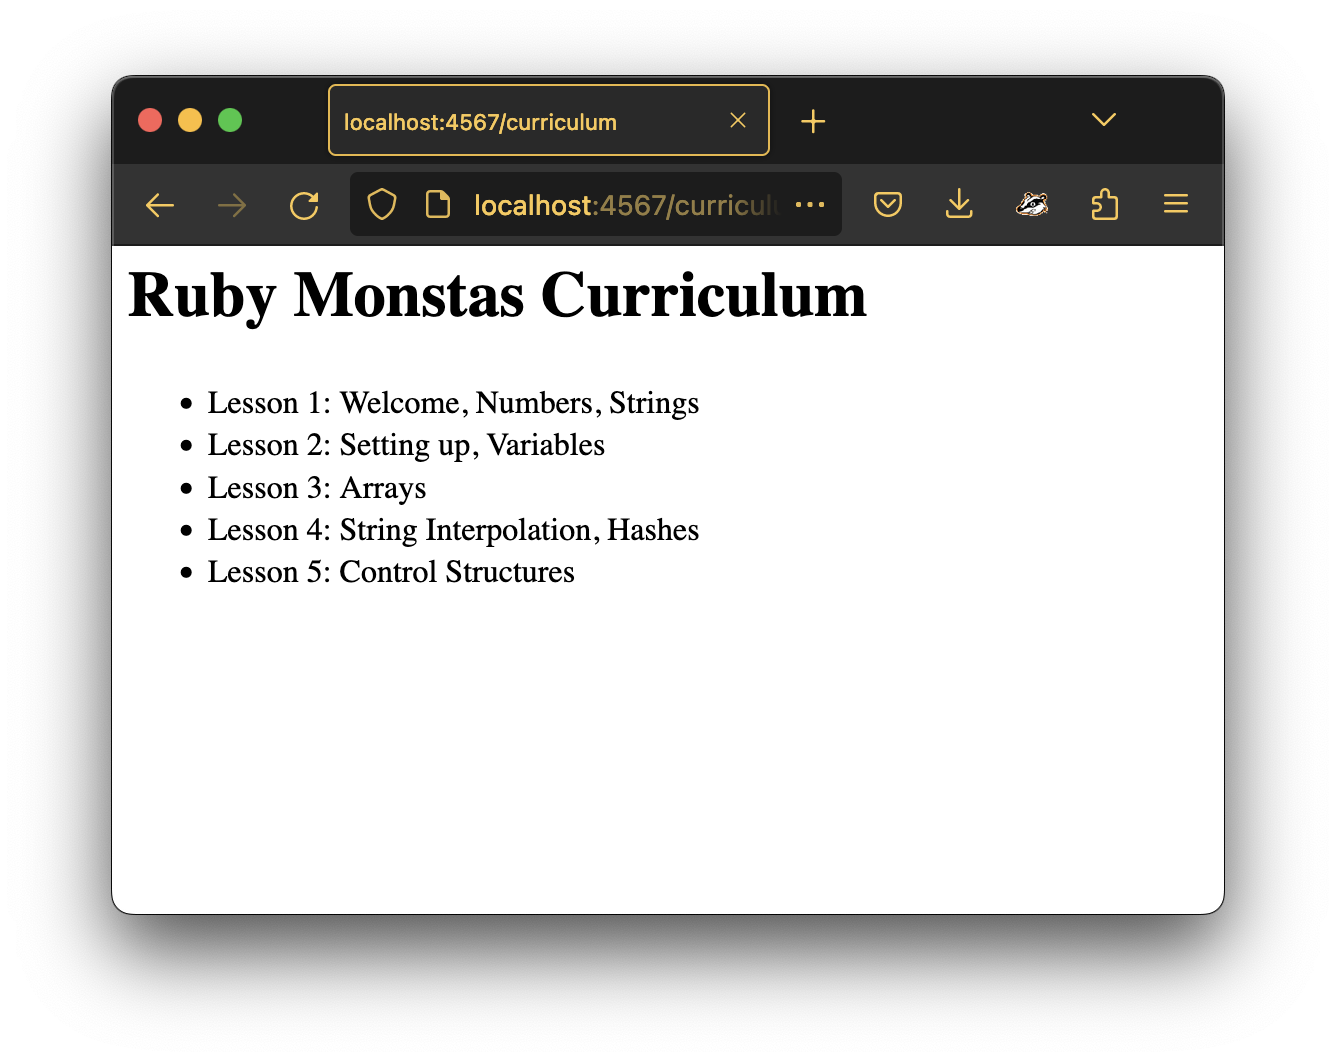 Screen shot of a browser window of the Sinatra application showing a list of curriculum entries